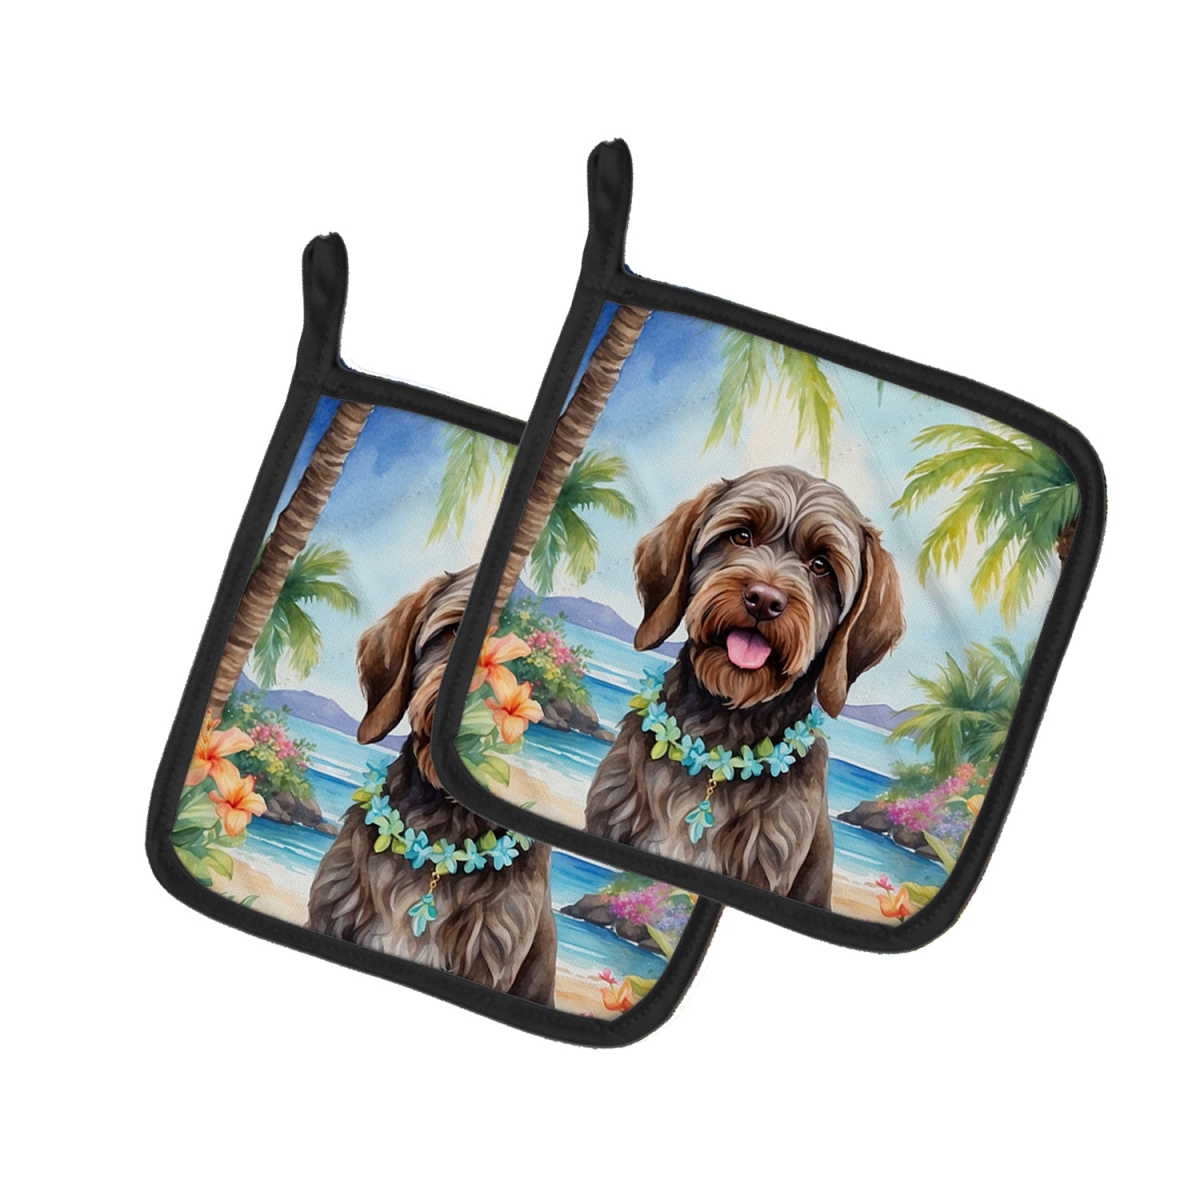 Picture of Carolines Treasures DAC6539PTHD 7.5 x 7.5 in. Wirehaired Pointing Griffon Luau Pair of Pot Holder